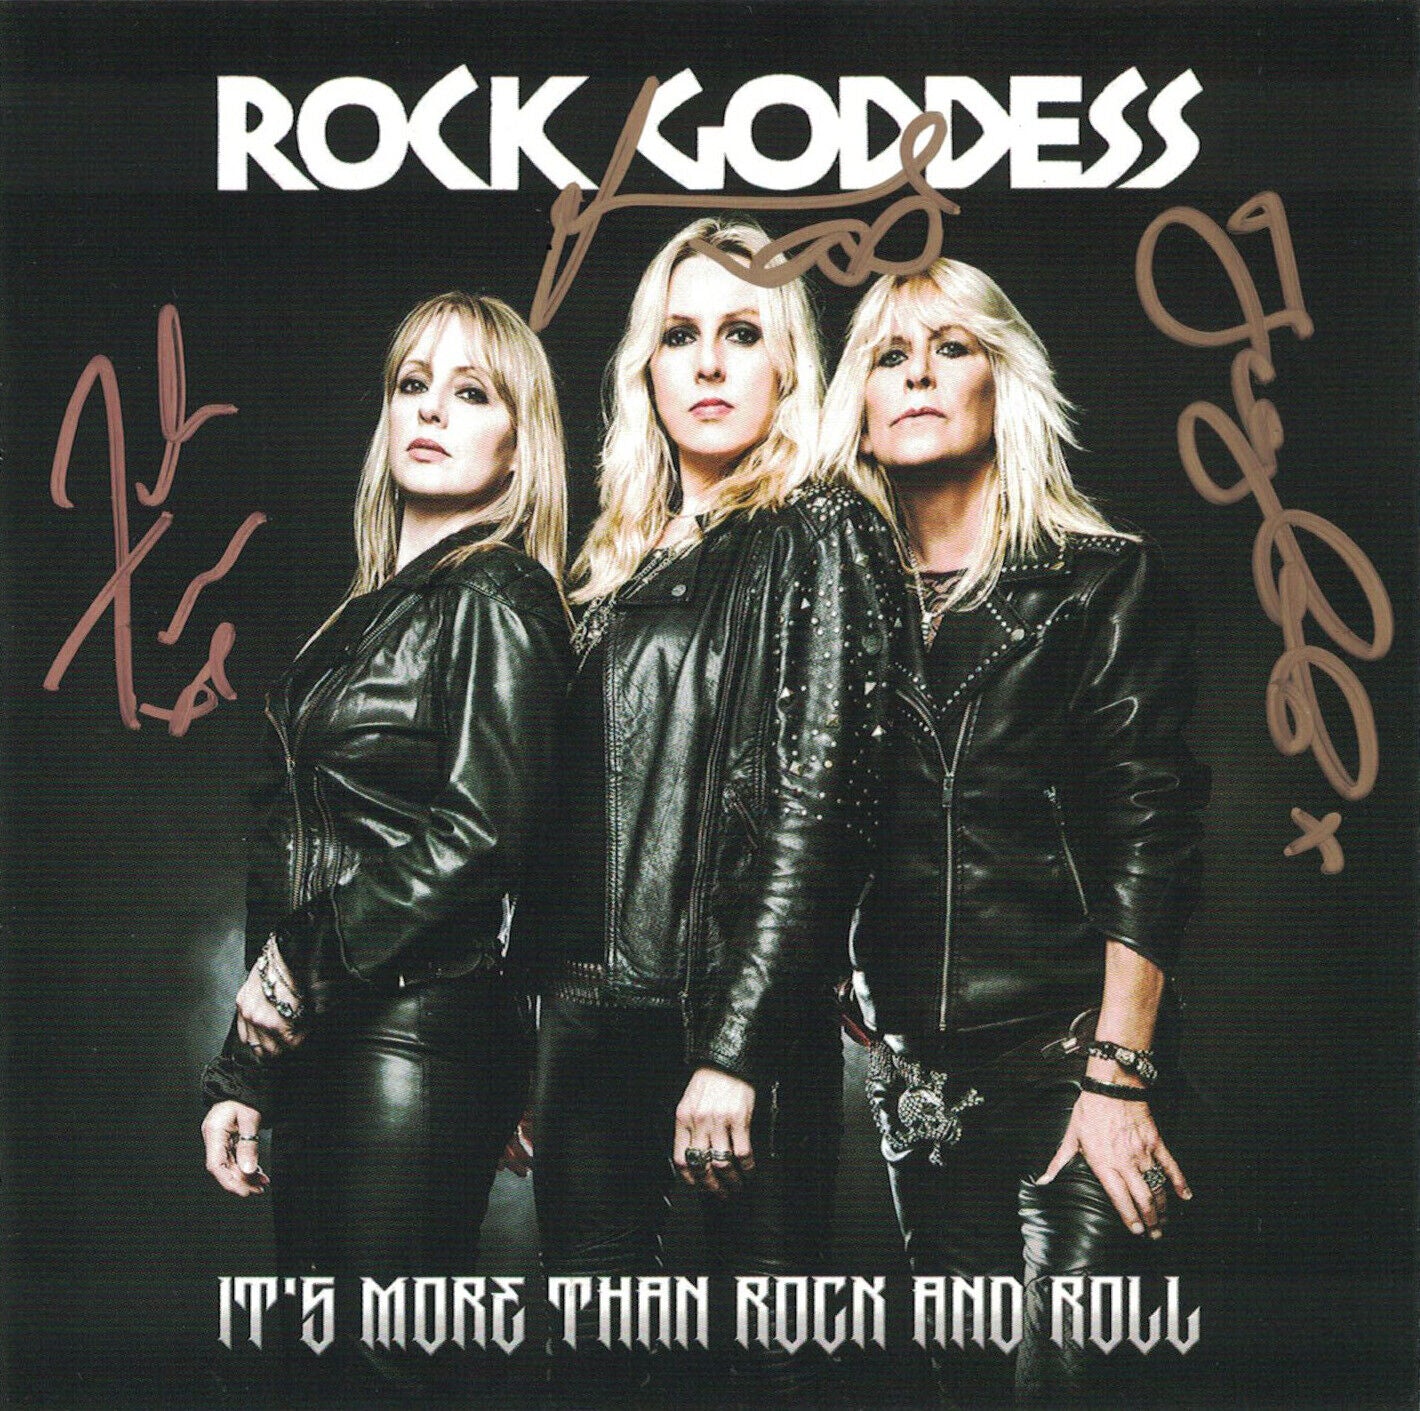 Rock Goddess - It's More Than Rock And Roll CD EP 2017 orig. Autogramme signed